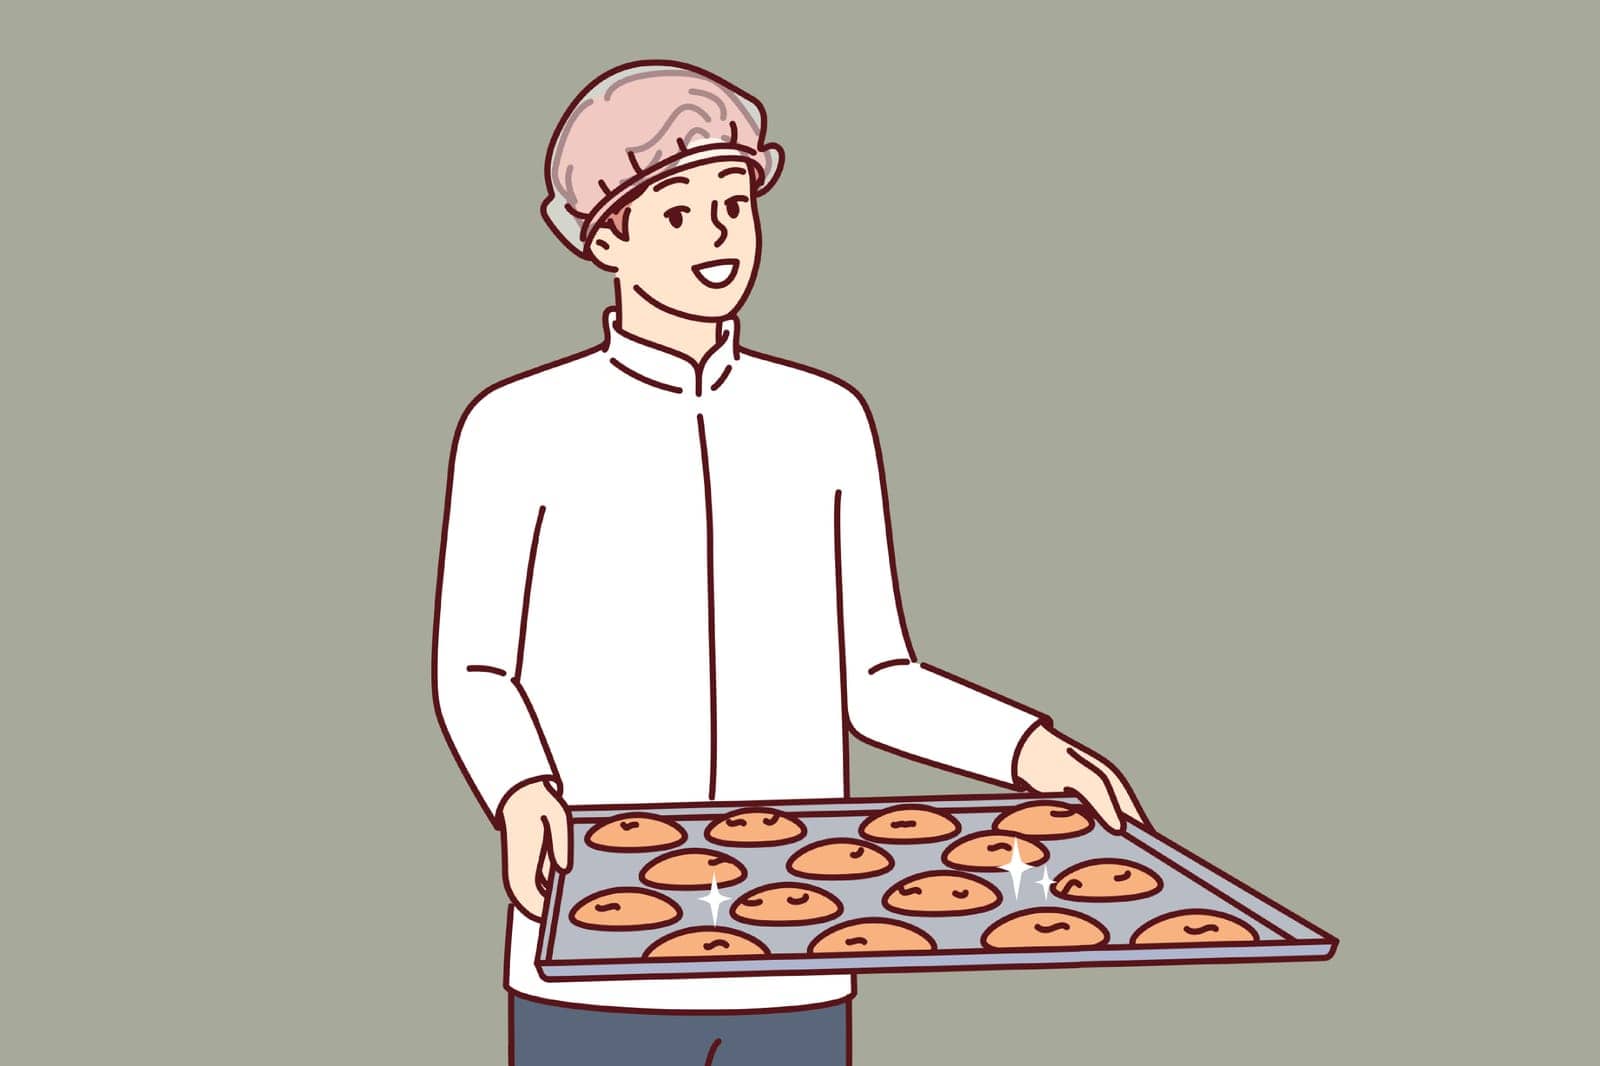 Man pastry chef is holding tray of cookies, dressed in white chef shirt and disposable hair cap. Guy confectioner prepares oatmeal cookies from natural ingredients, for sale in own bakery